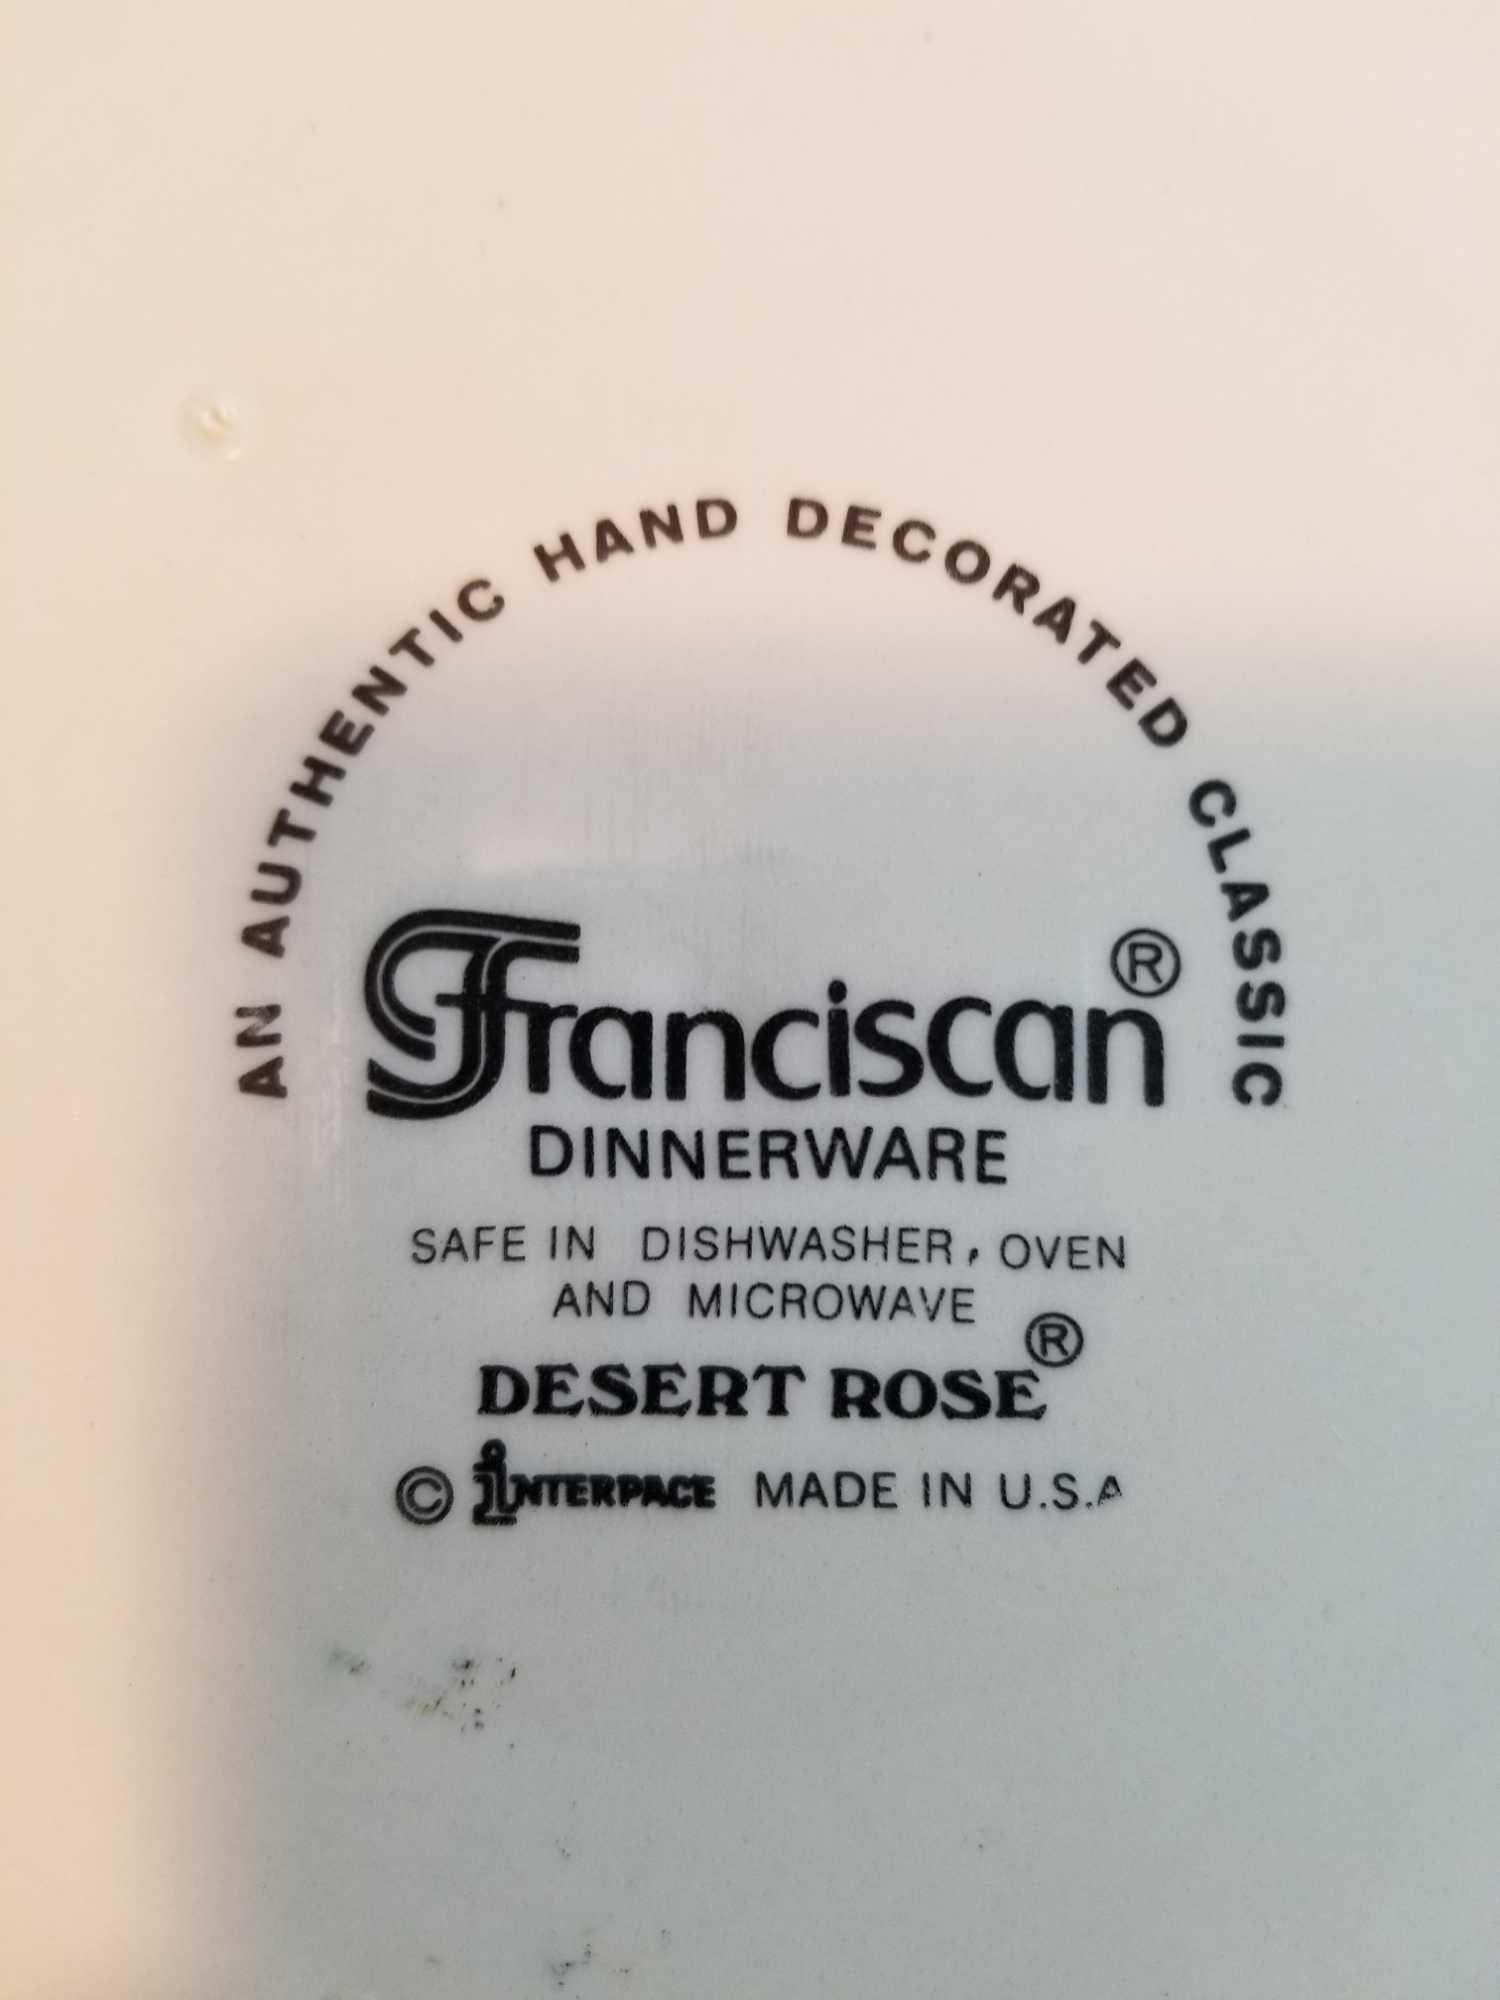 B2 - Franciscan Dinnerware and Others